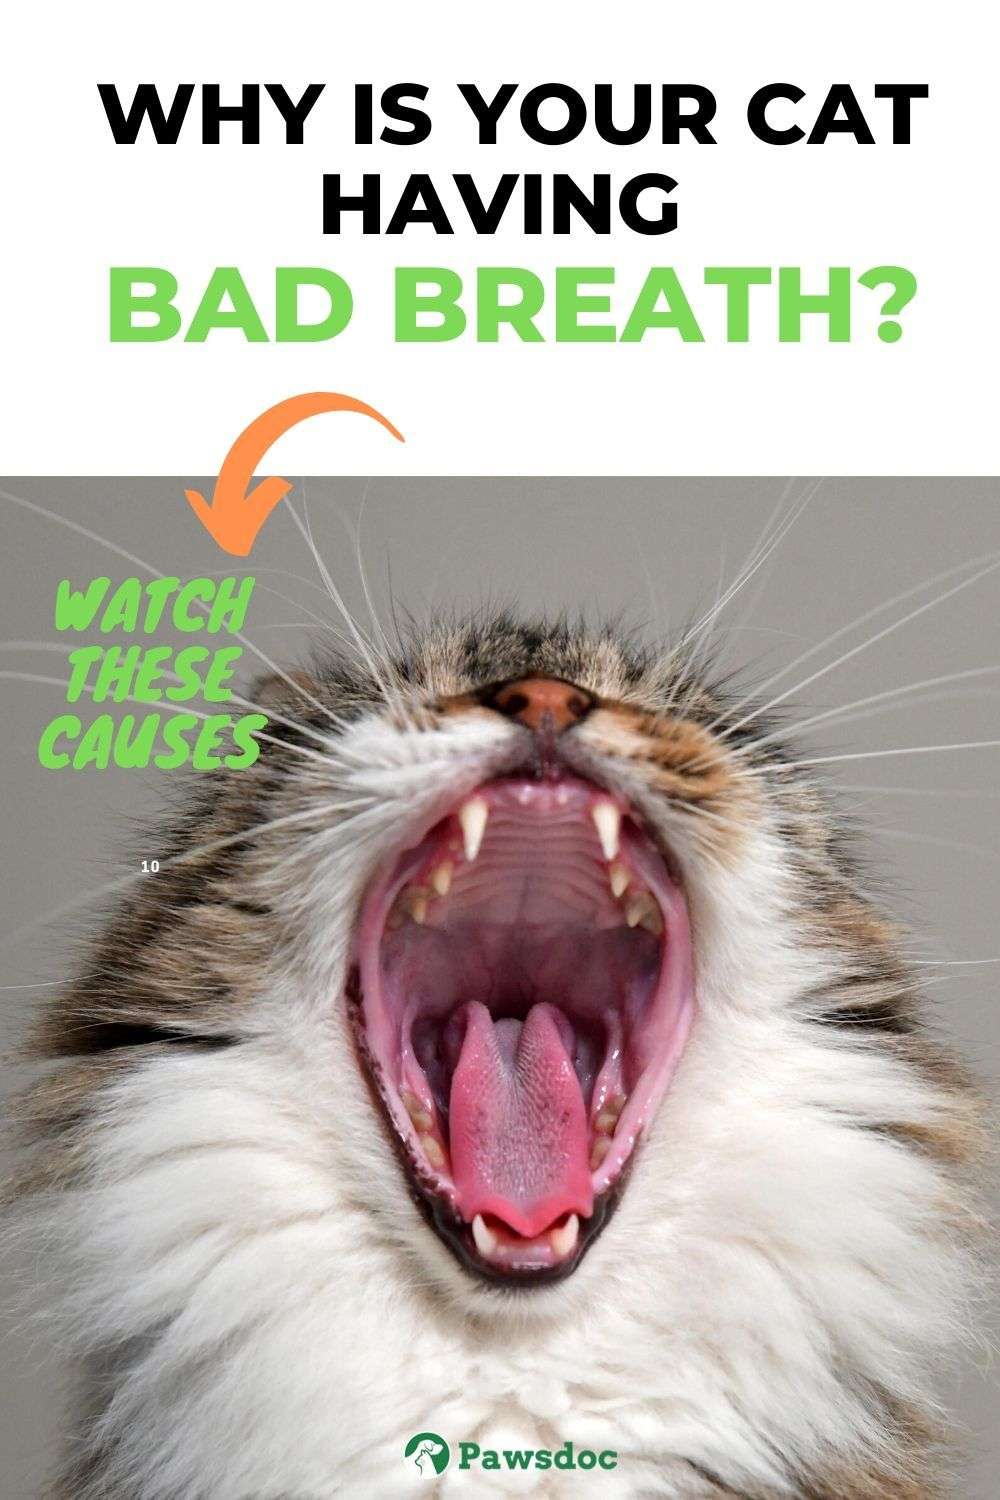 My Cat Has Bad Breath I Common Causes And Remedies